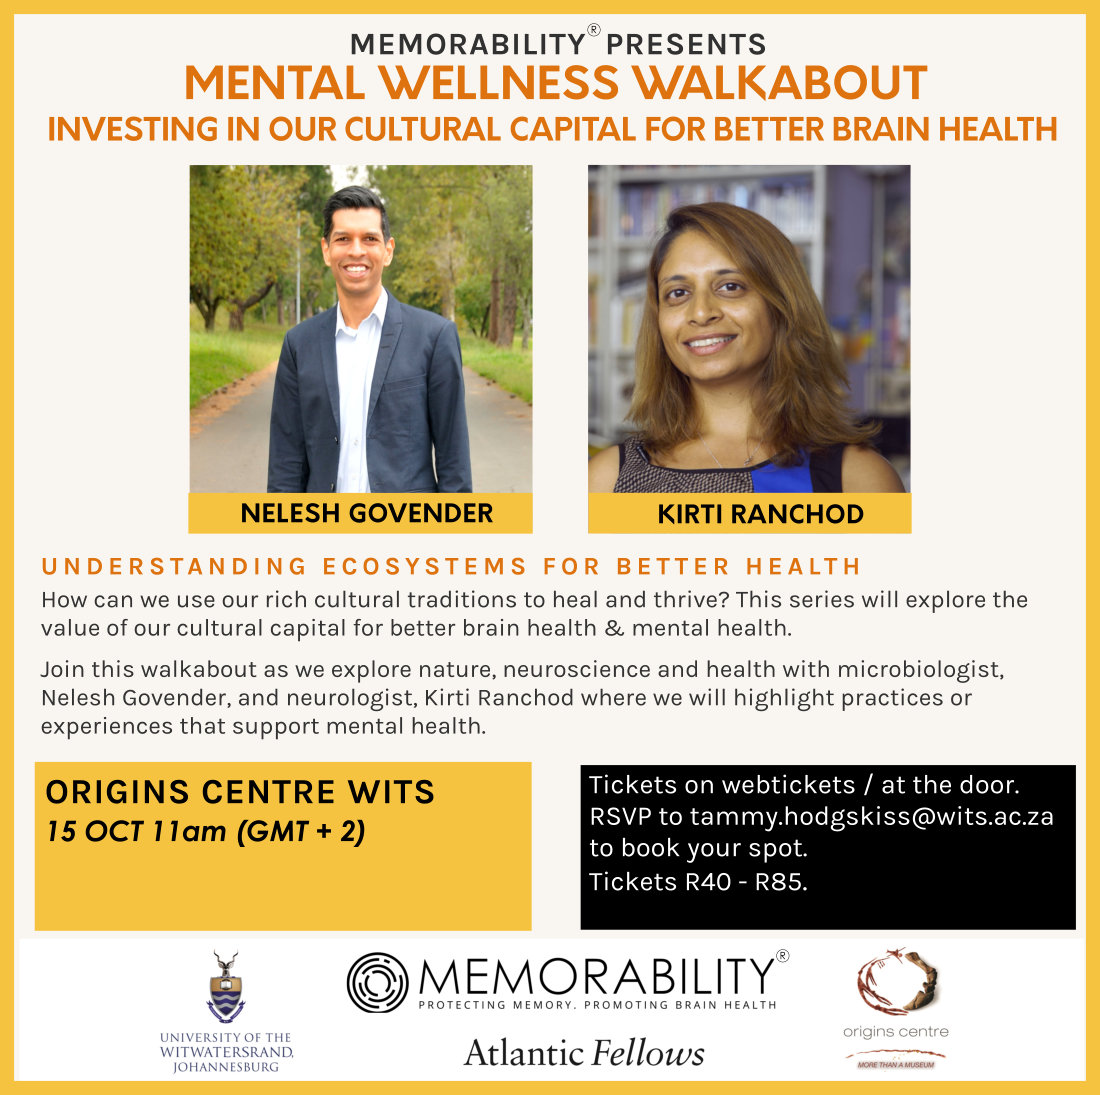 Mental Wellness Walkabout: Understanding Ecosystems for Better Health 15 Oct, 11am. Come explore nature, neuroscience and health with microbiologist, Nelesh Govender, and neurologist, Kirti Ranchod where we will highlight practices or experiences that support mental health.